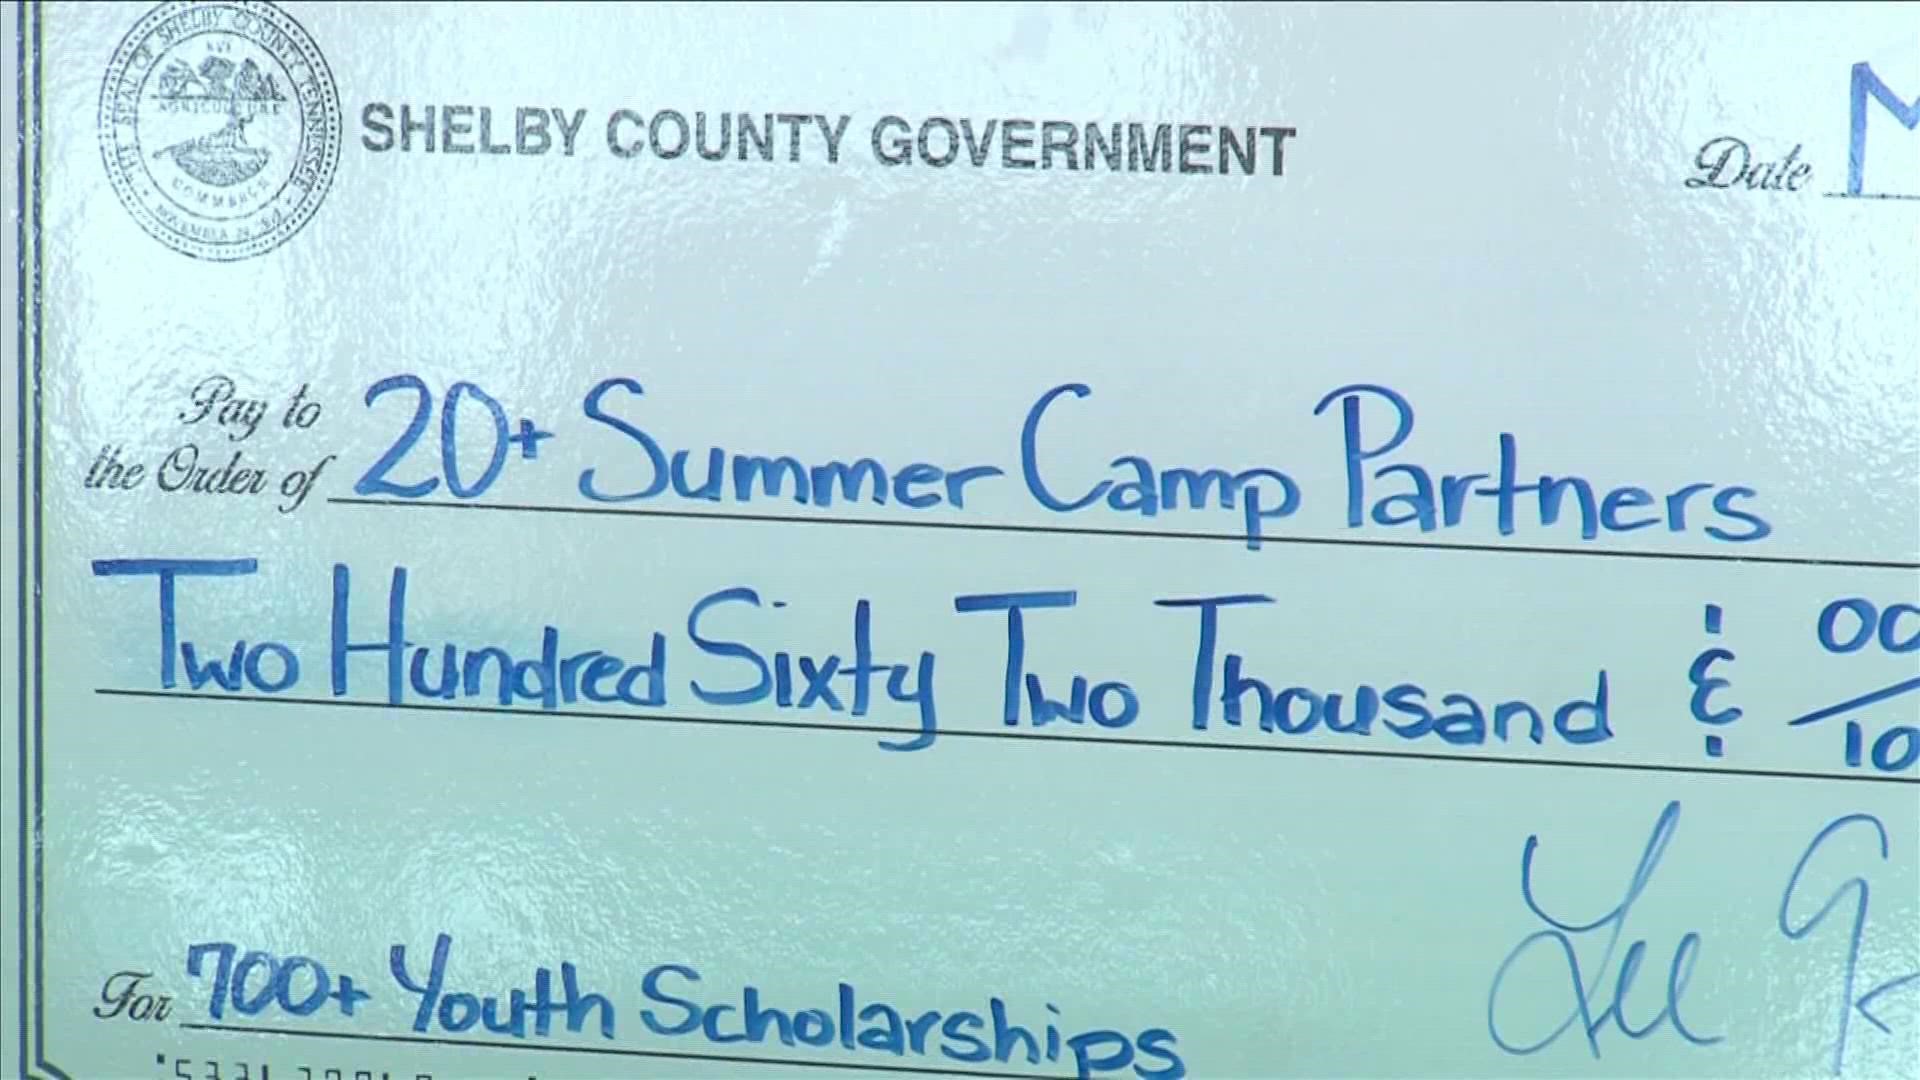 List Shelby County's Youth Summer Camp Scholarship program